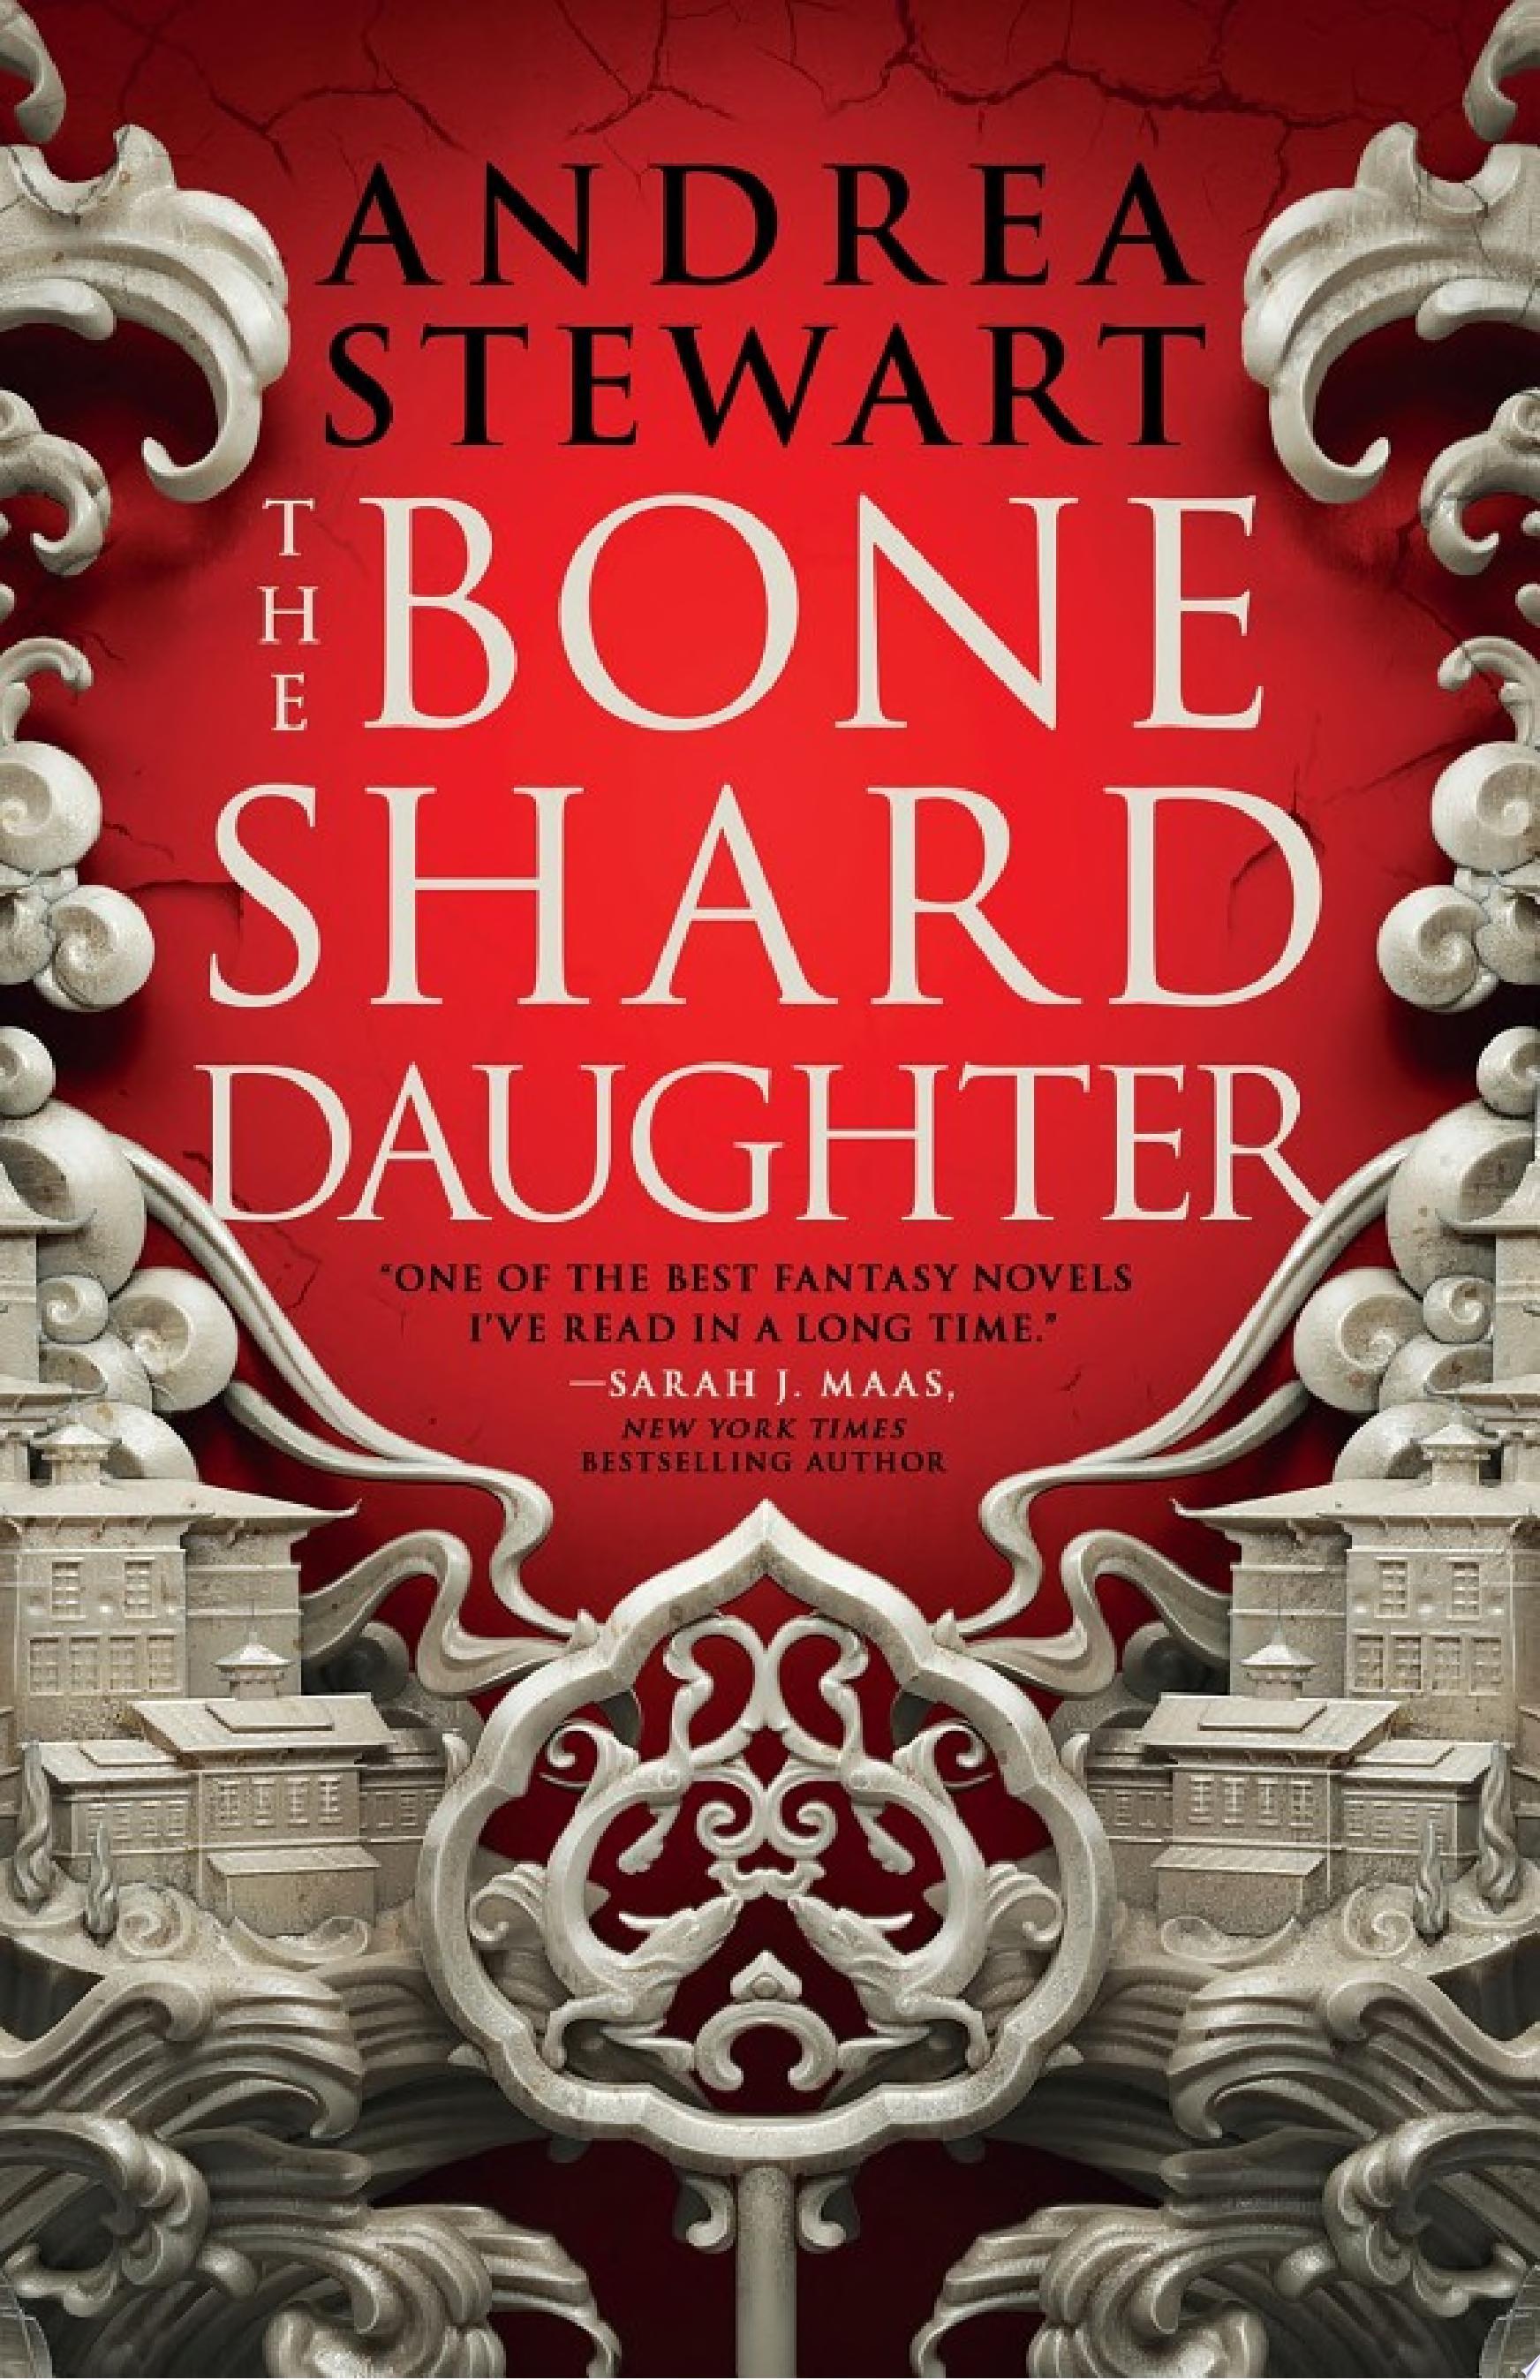 Image for "The Bone Shard Daughter"